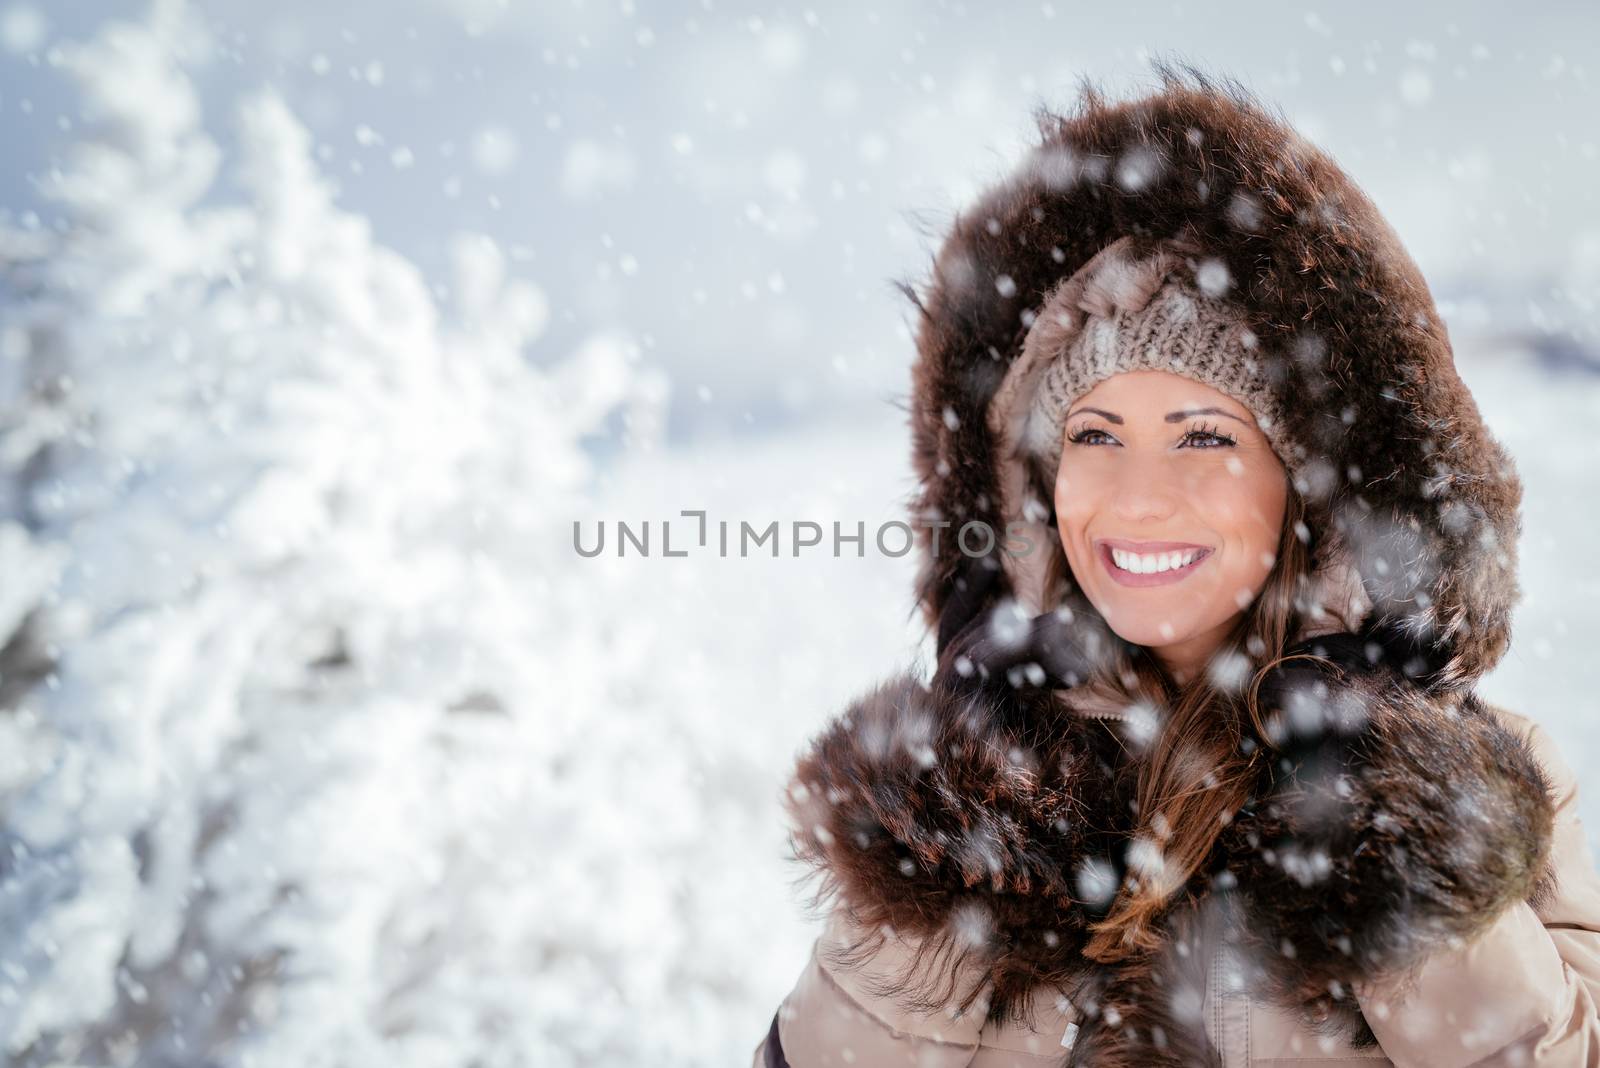 Portrait of a beautiful smiling girl outdoors while its snowing.